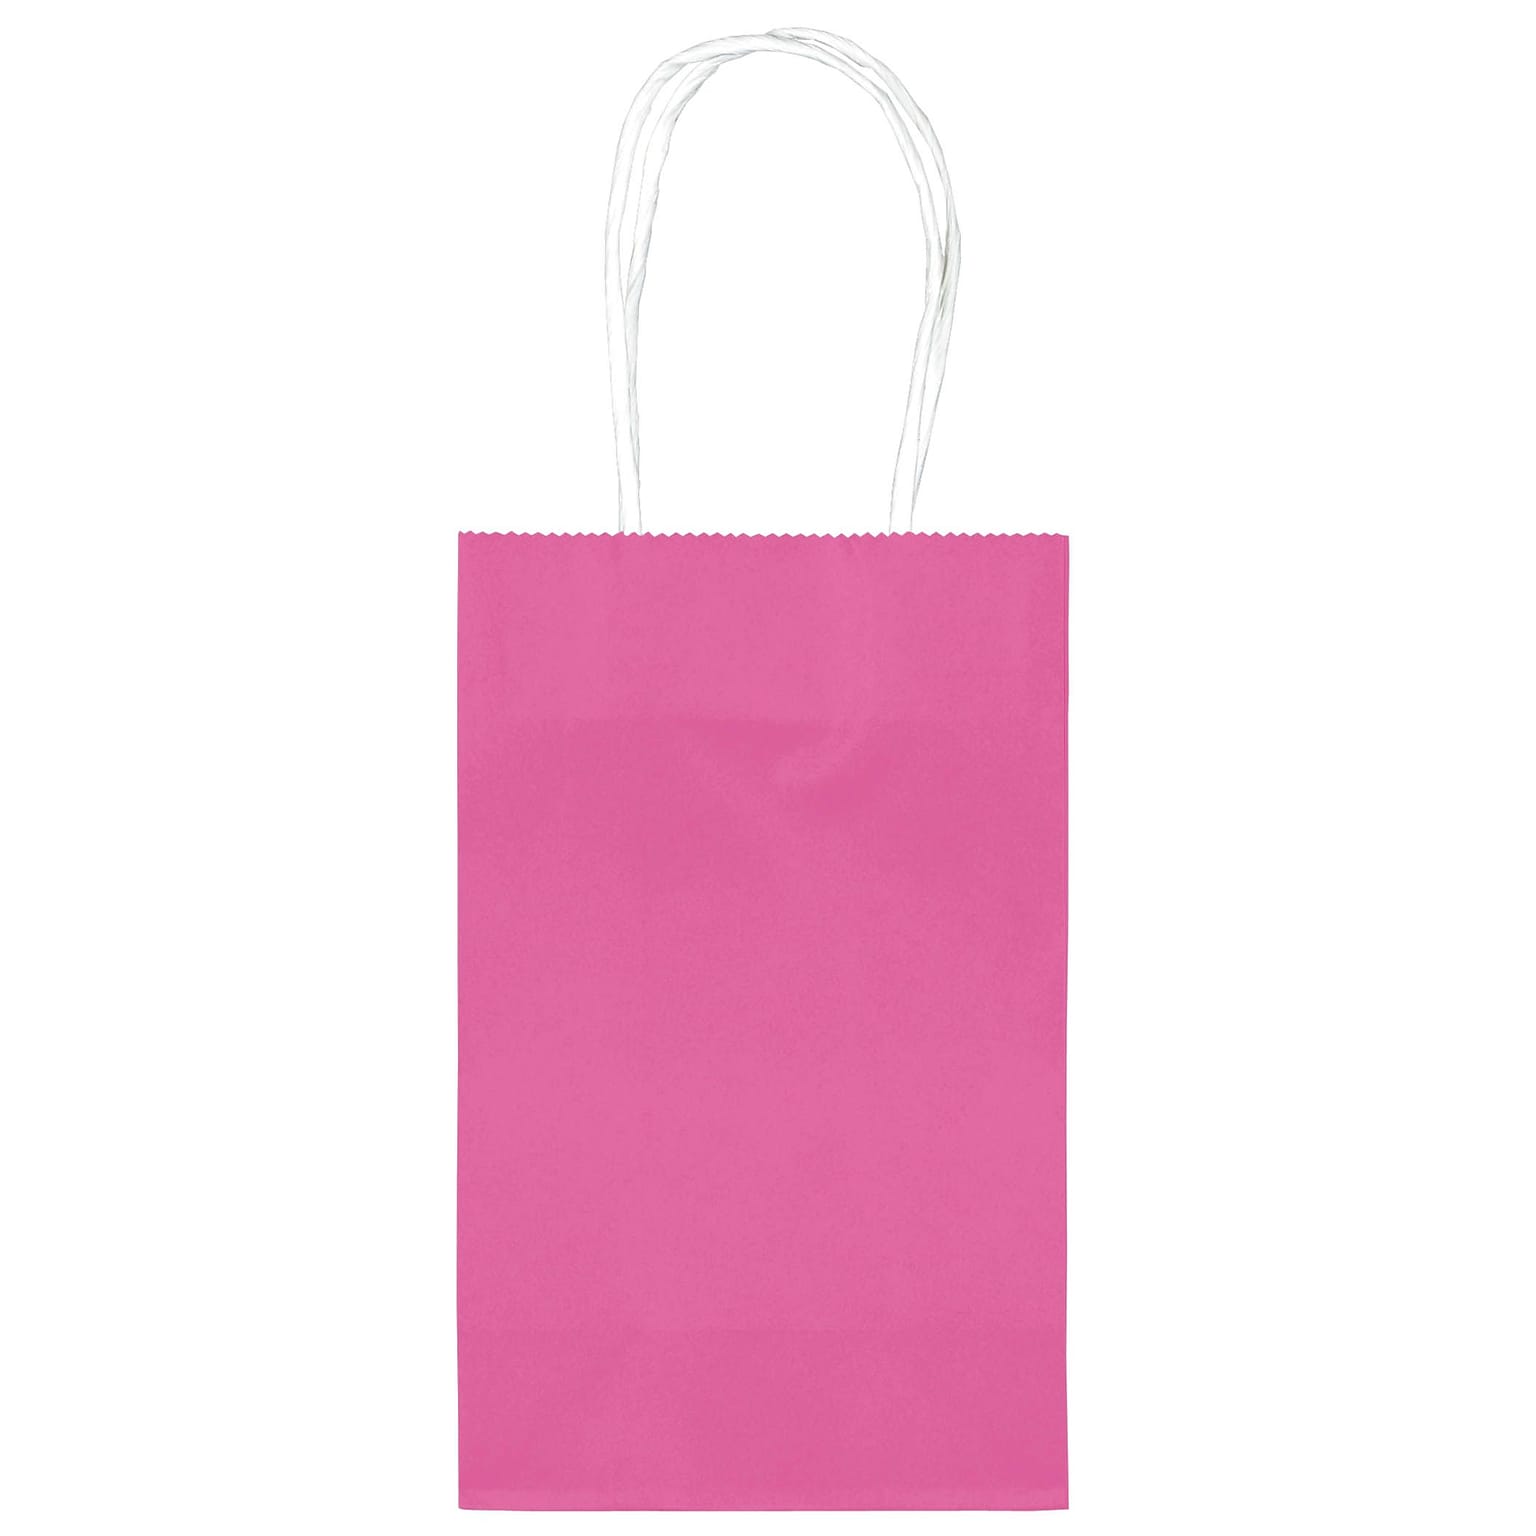 Amscan Cub Bags Value Pack, Bright Pink, 4 Bags/Pack (162500.103)